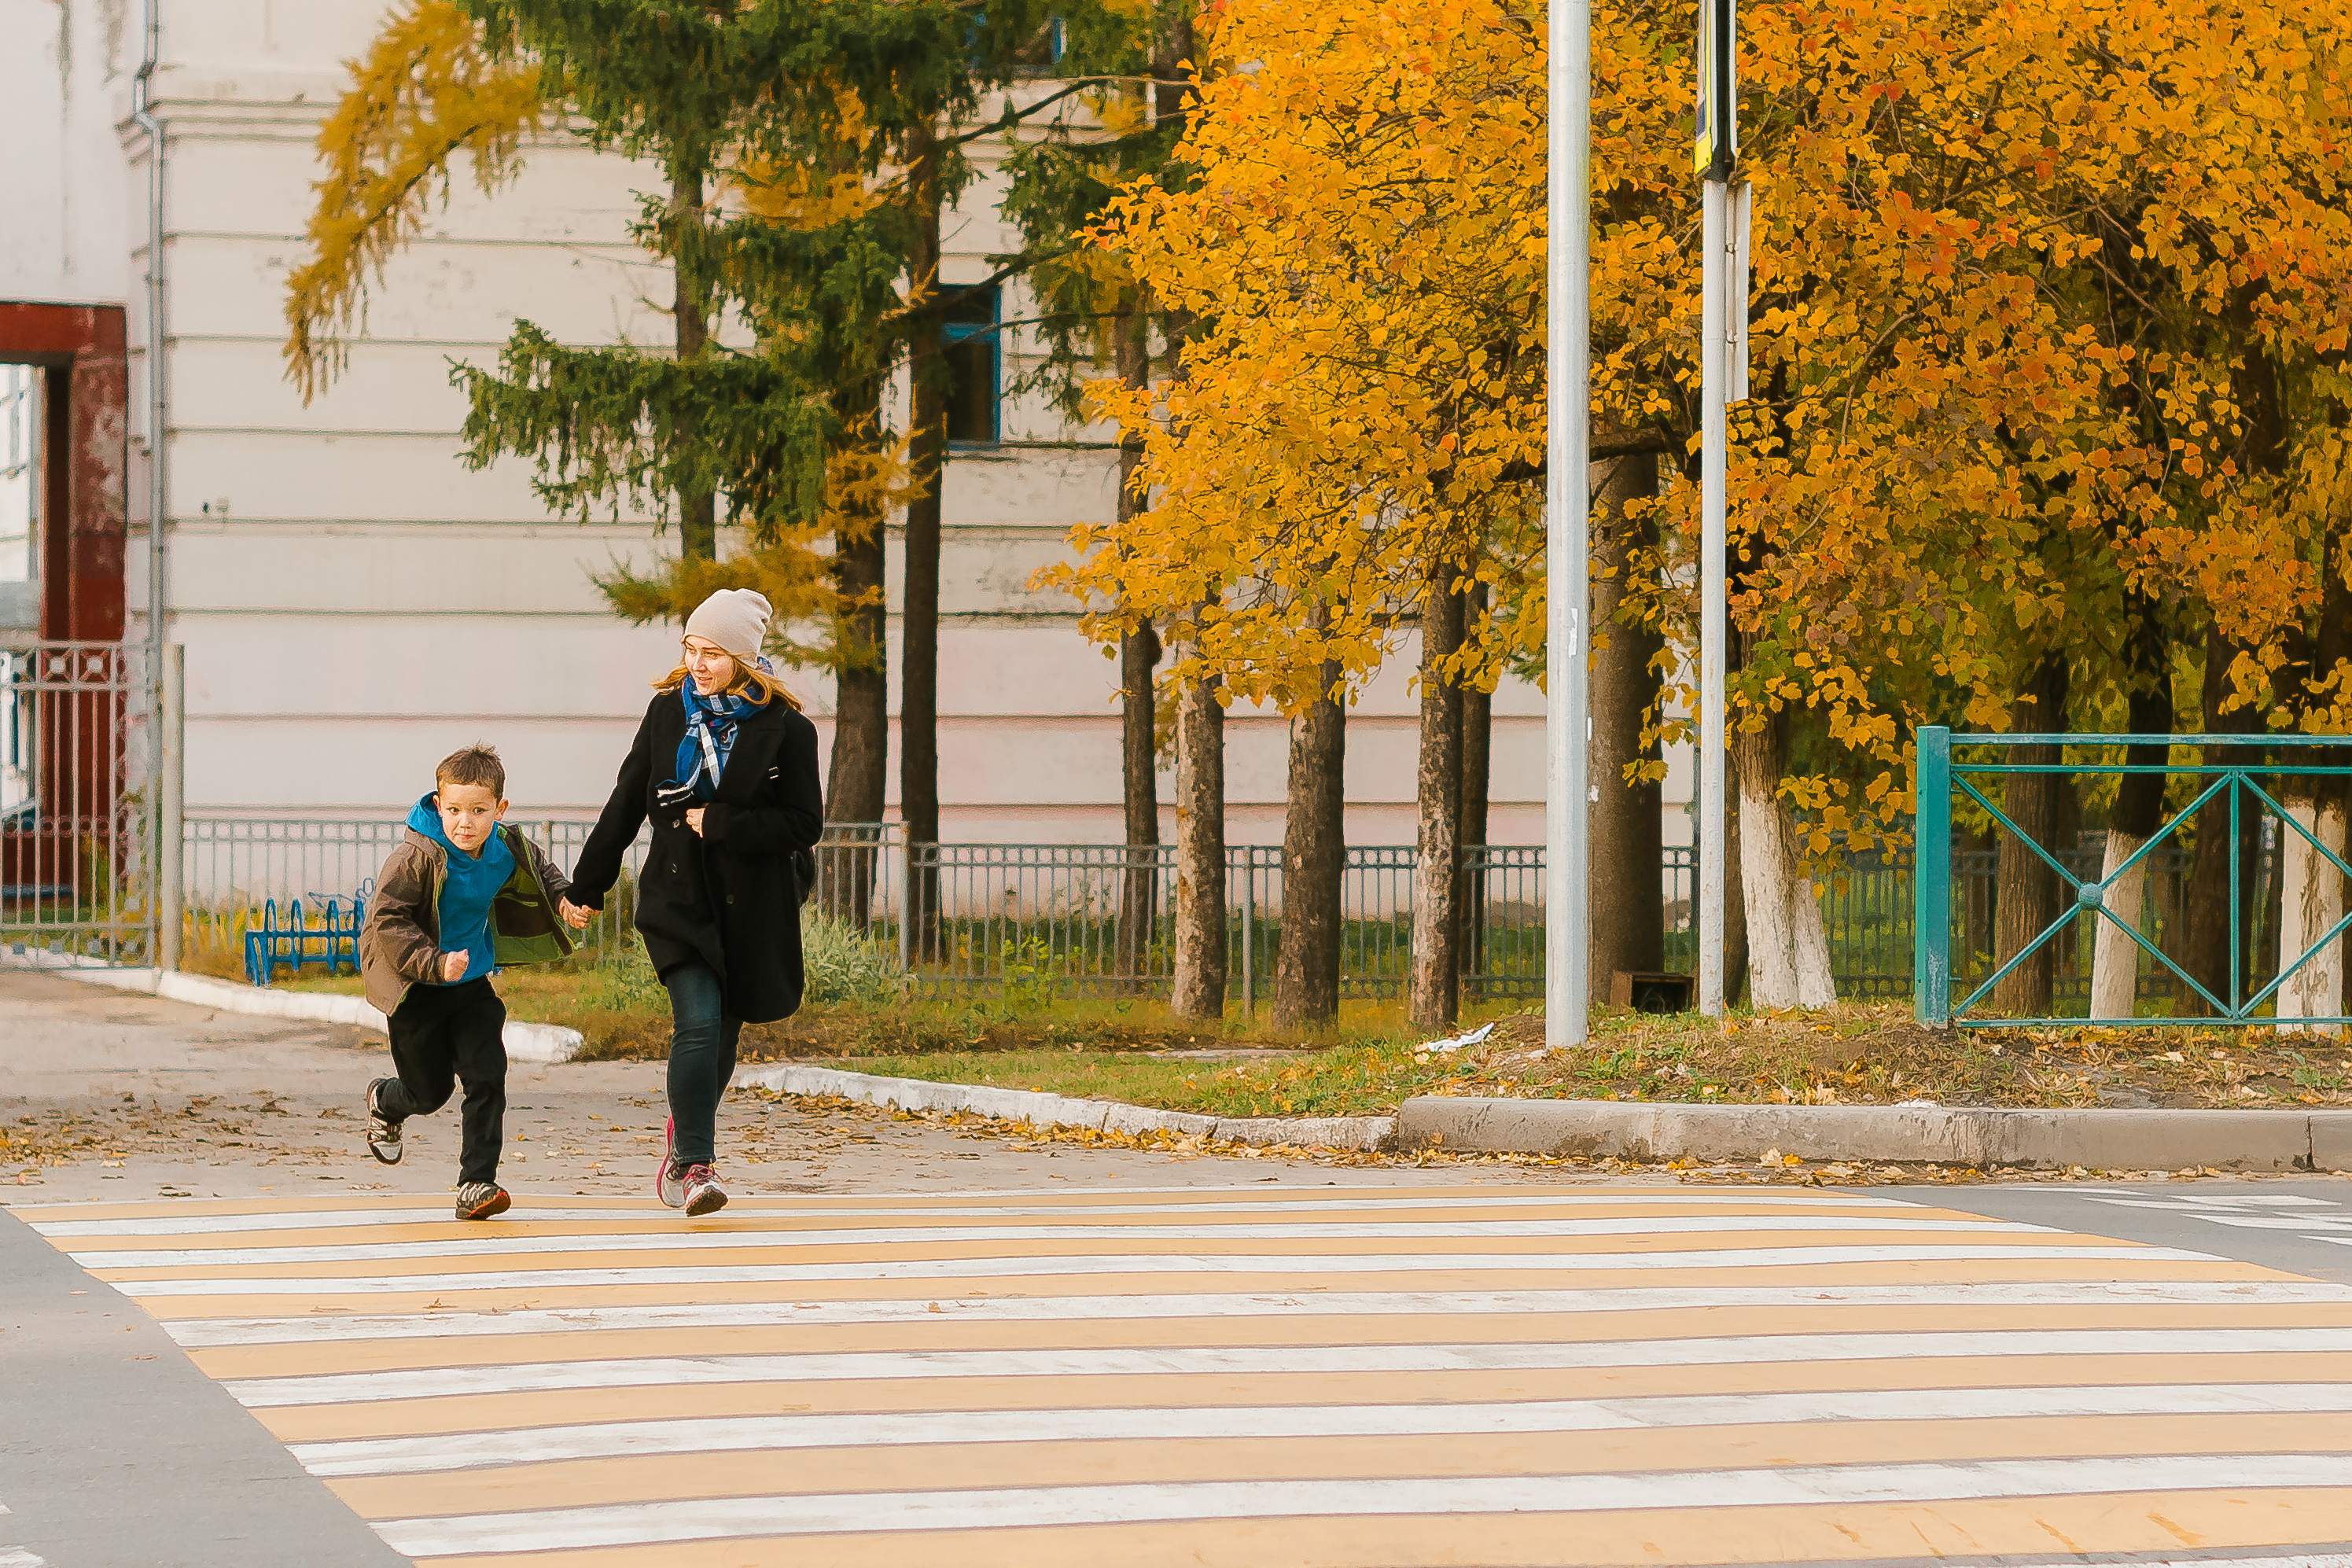 Mom with his child crosses the road in the city. | Source: Shutterstock